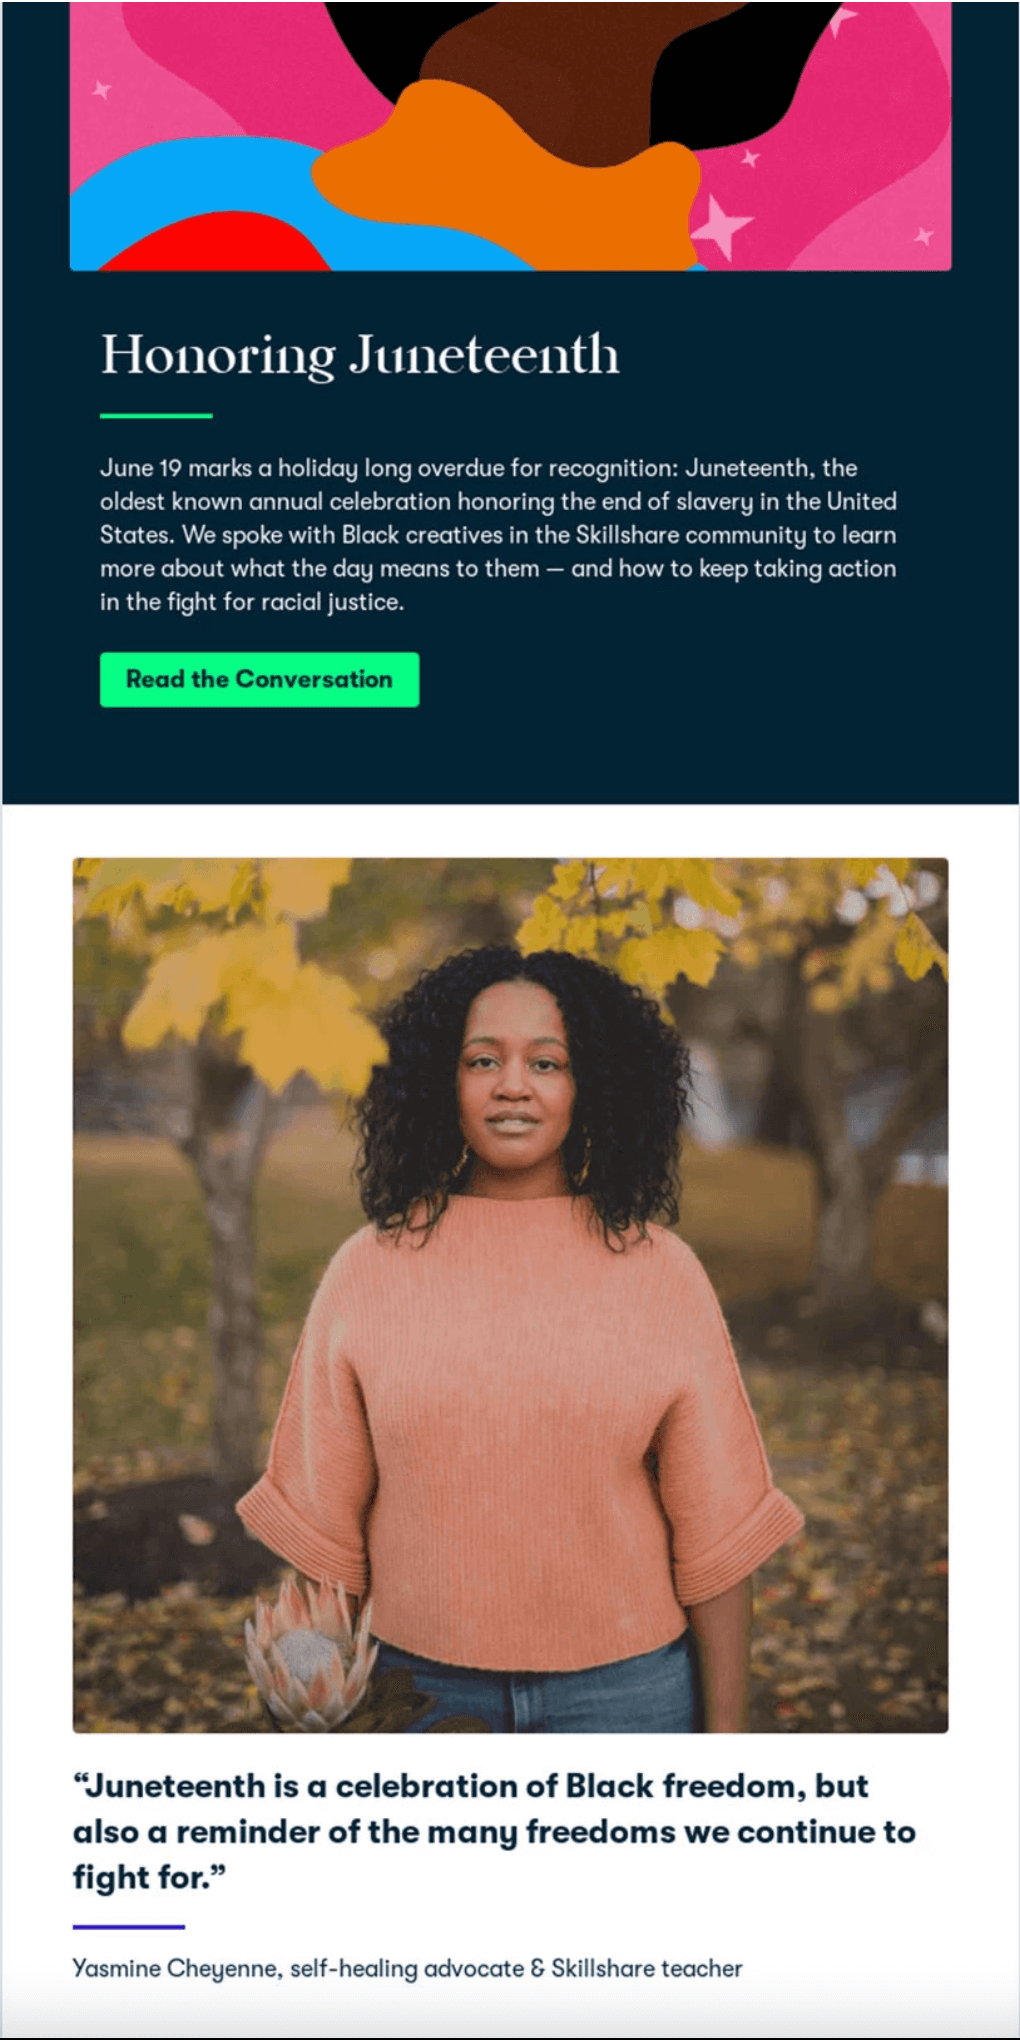 Skillshare's Honoring Juneteenth email It starts with a vibrant painting and an explanation of the series and is followed by a photo of a black woman named Yasmine and a quote, "Juneteenth is a celebration of Black freedom, but also a reminder of the many freedoms we continue to fight for."